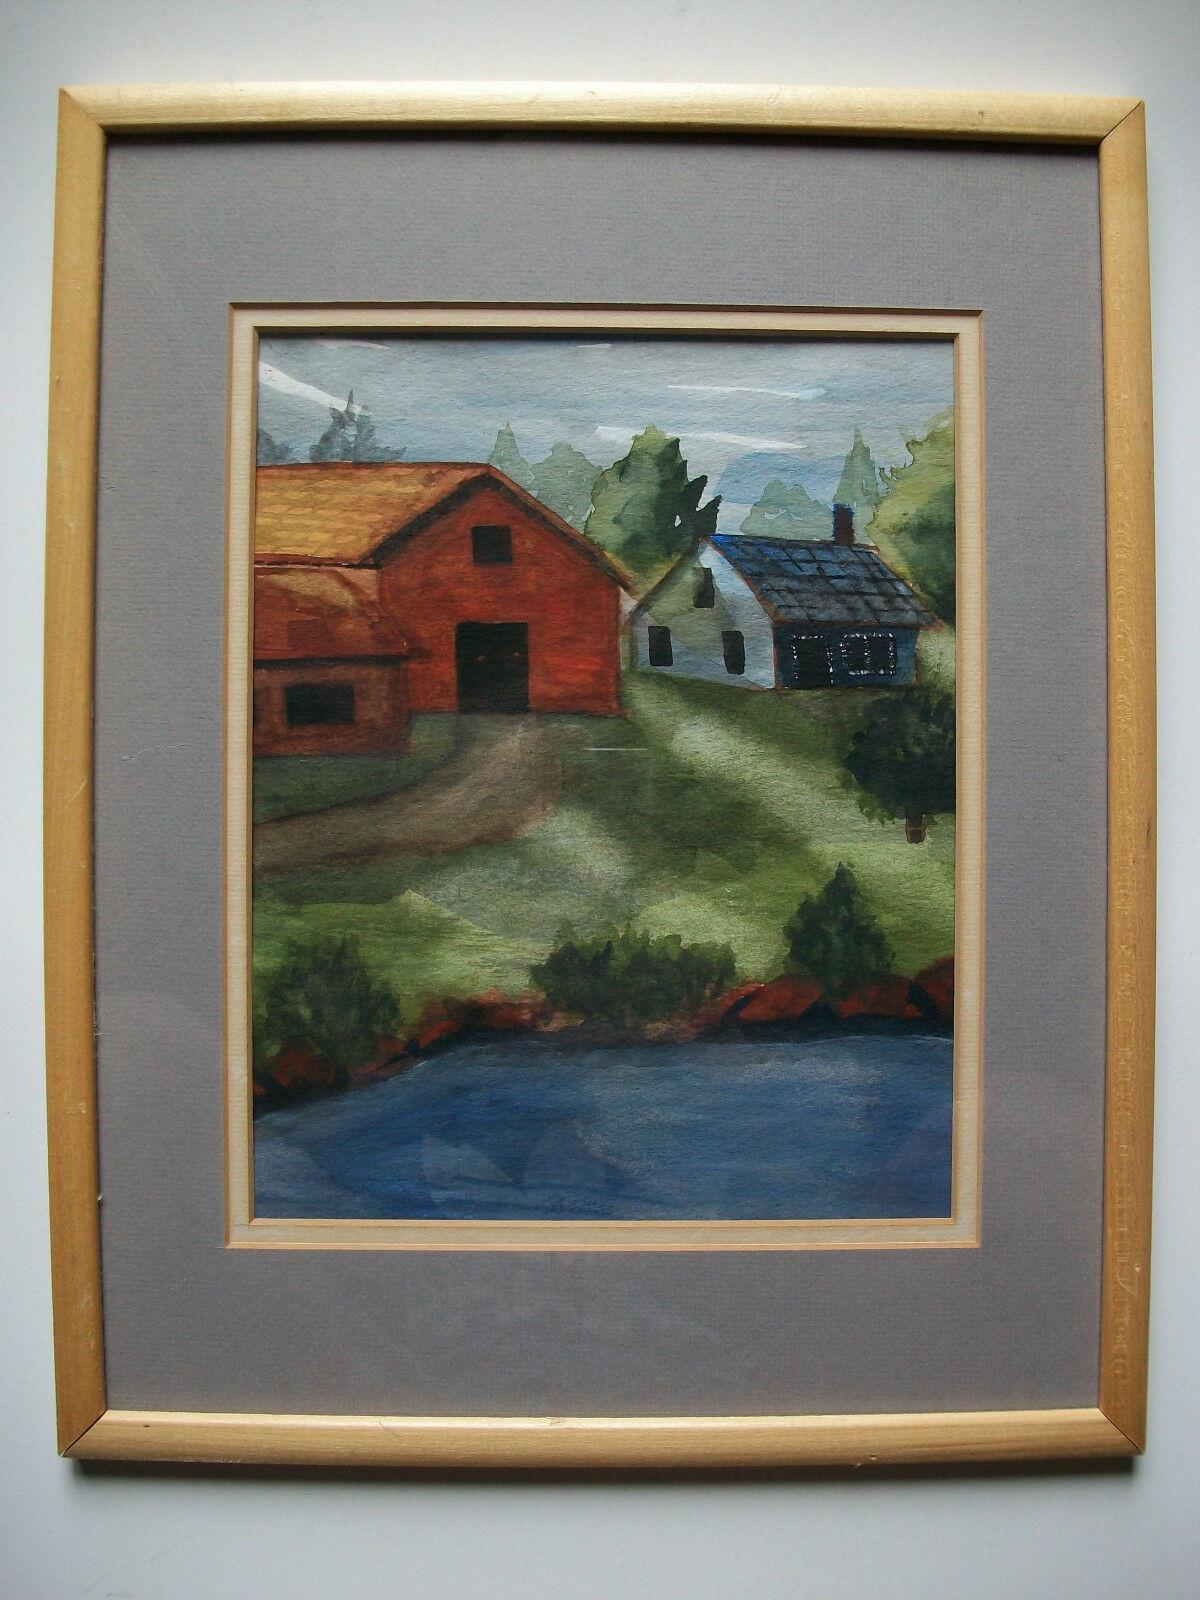 Canadian Folk Art Watercolor Painting - Unsigned - Framed - Canada - Mid 20th Century For Sale